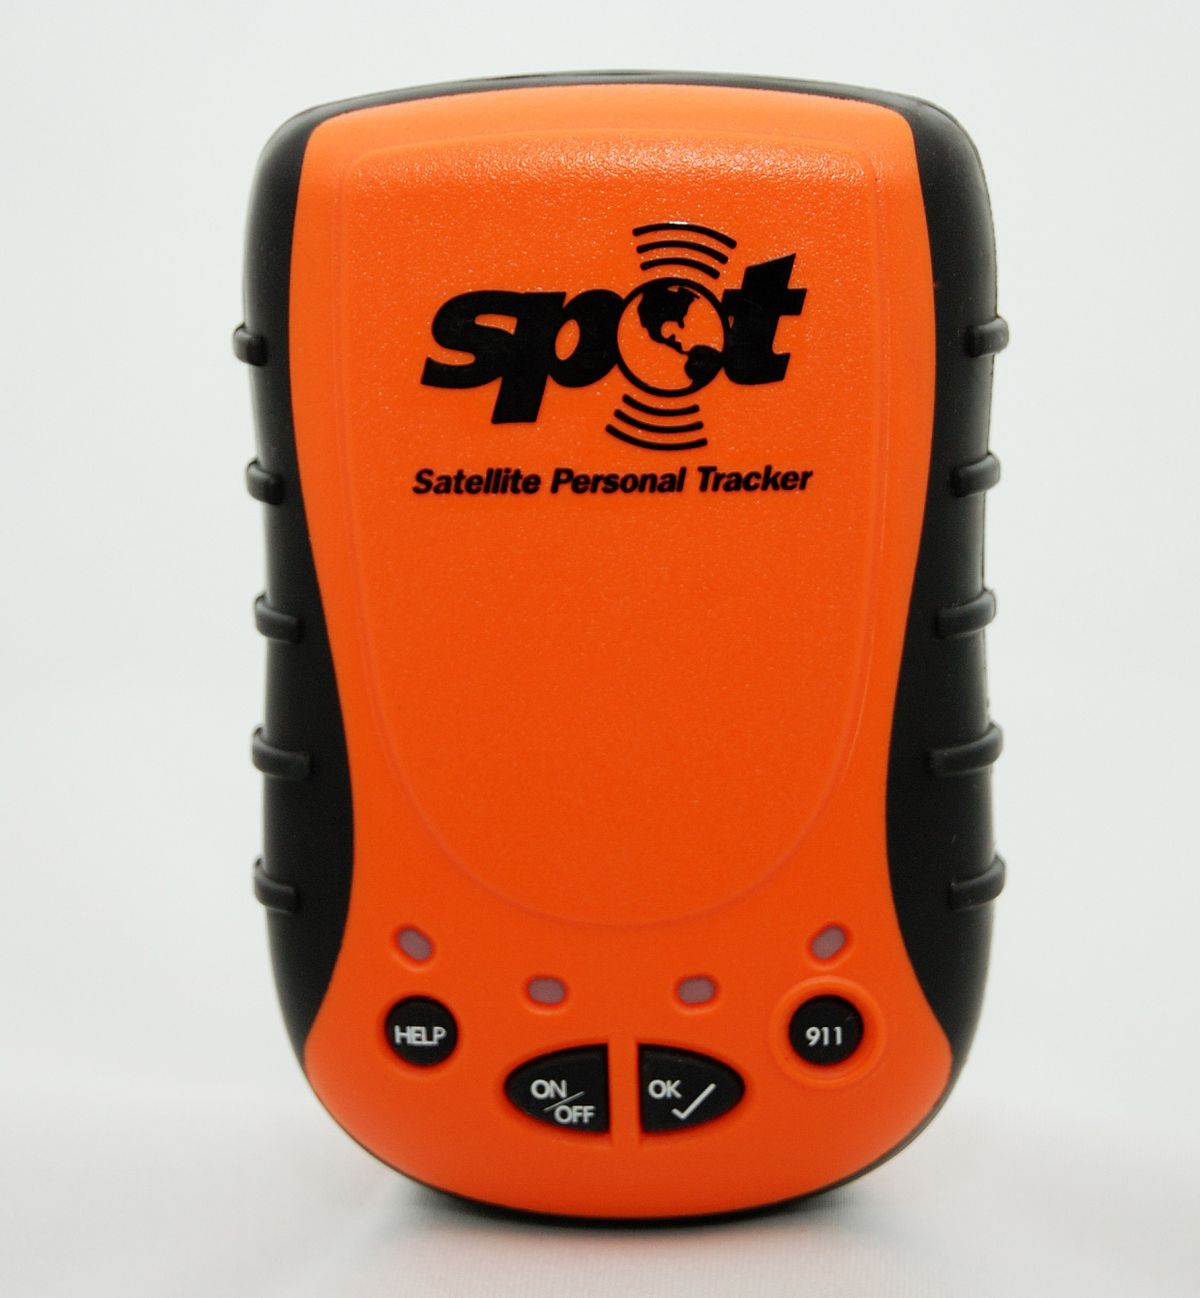 SPOT uses satellite technology to alert emergency services.